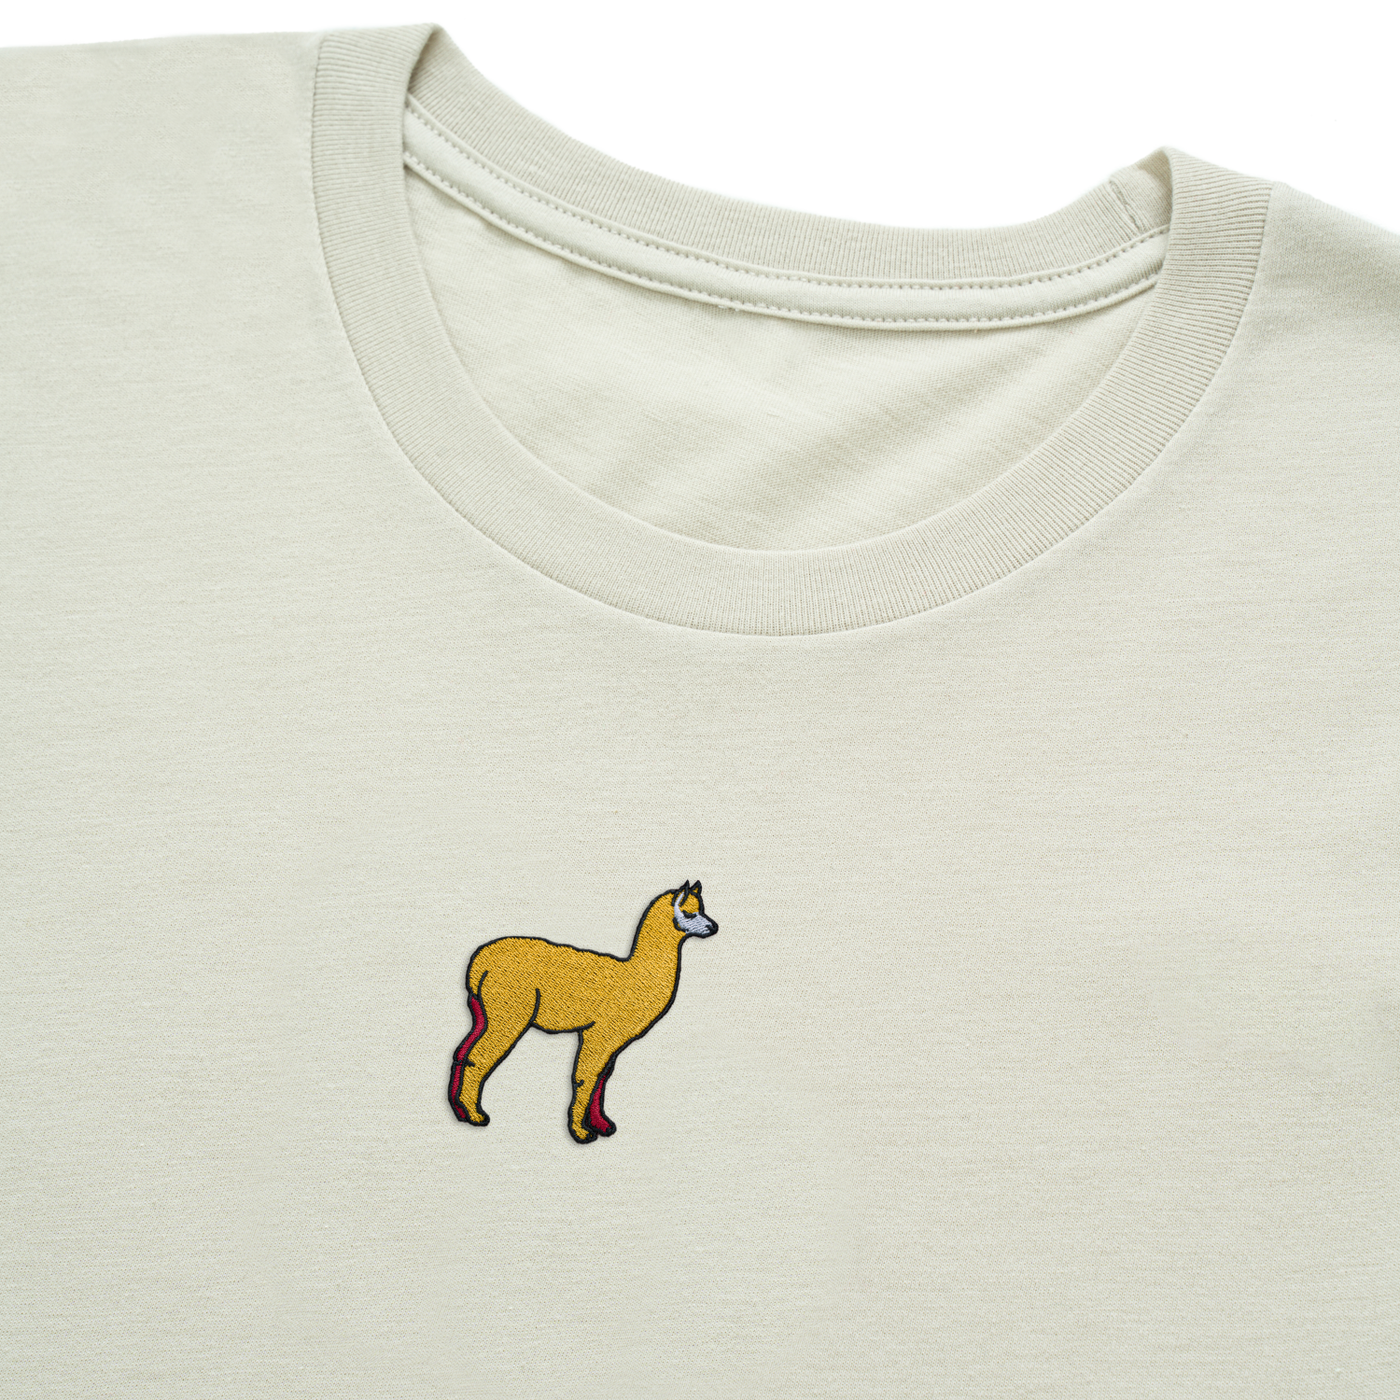 Bobby's Planet Men's Embroidered Alpaca T-Shirt from South American Amazon Animals Collection in Heather Dust Color#color_heather-dust